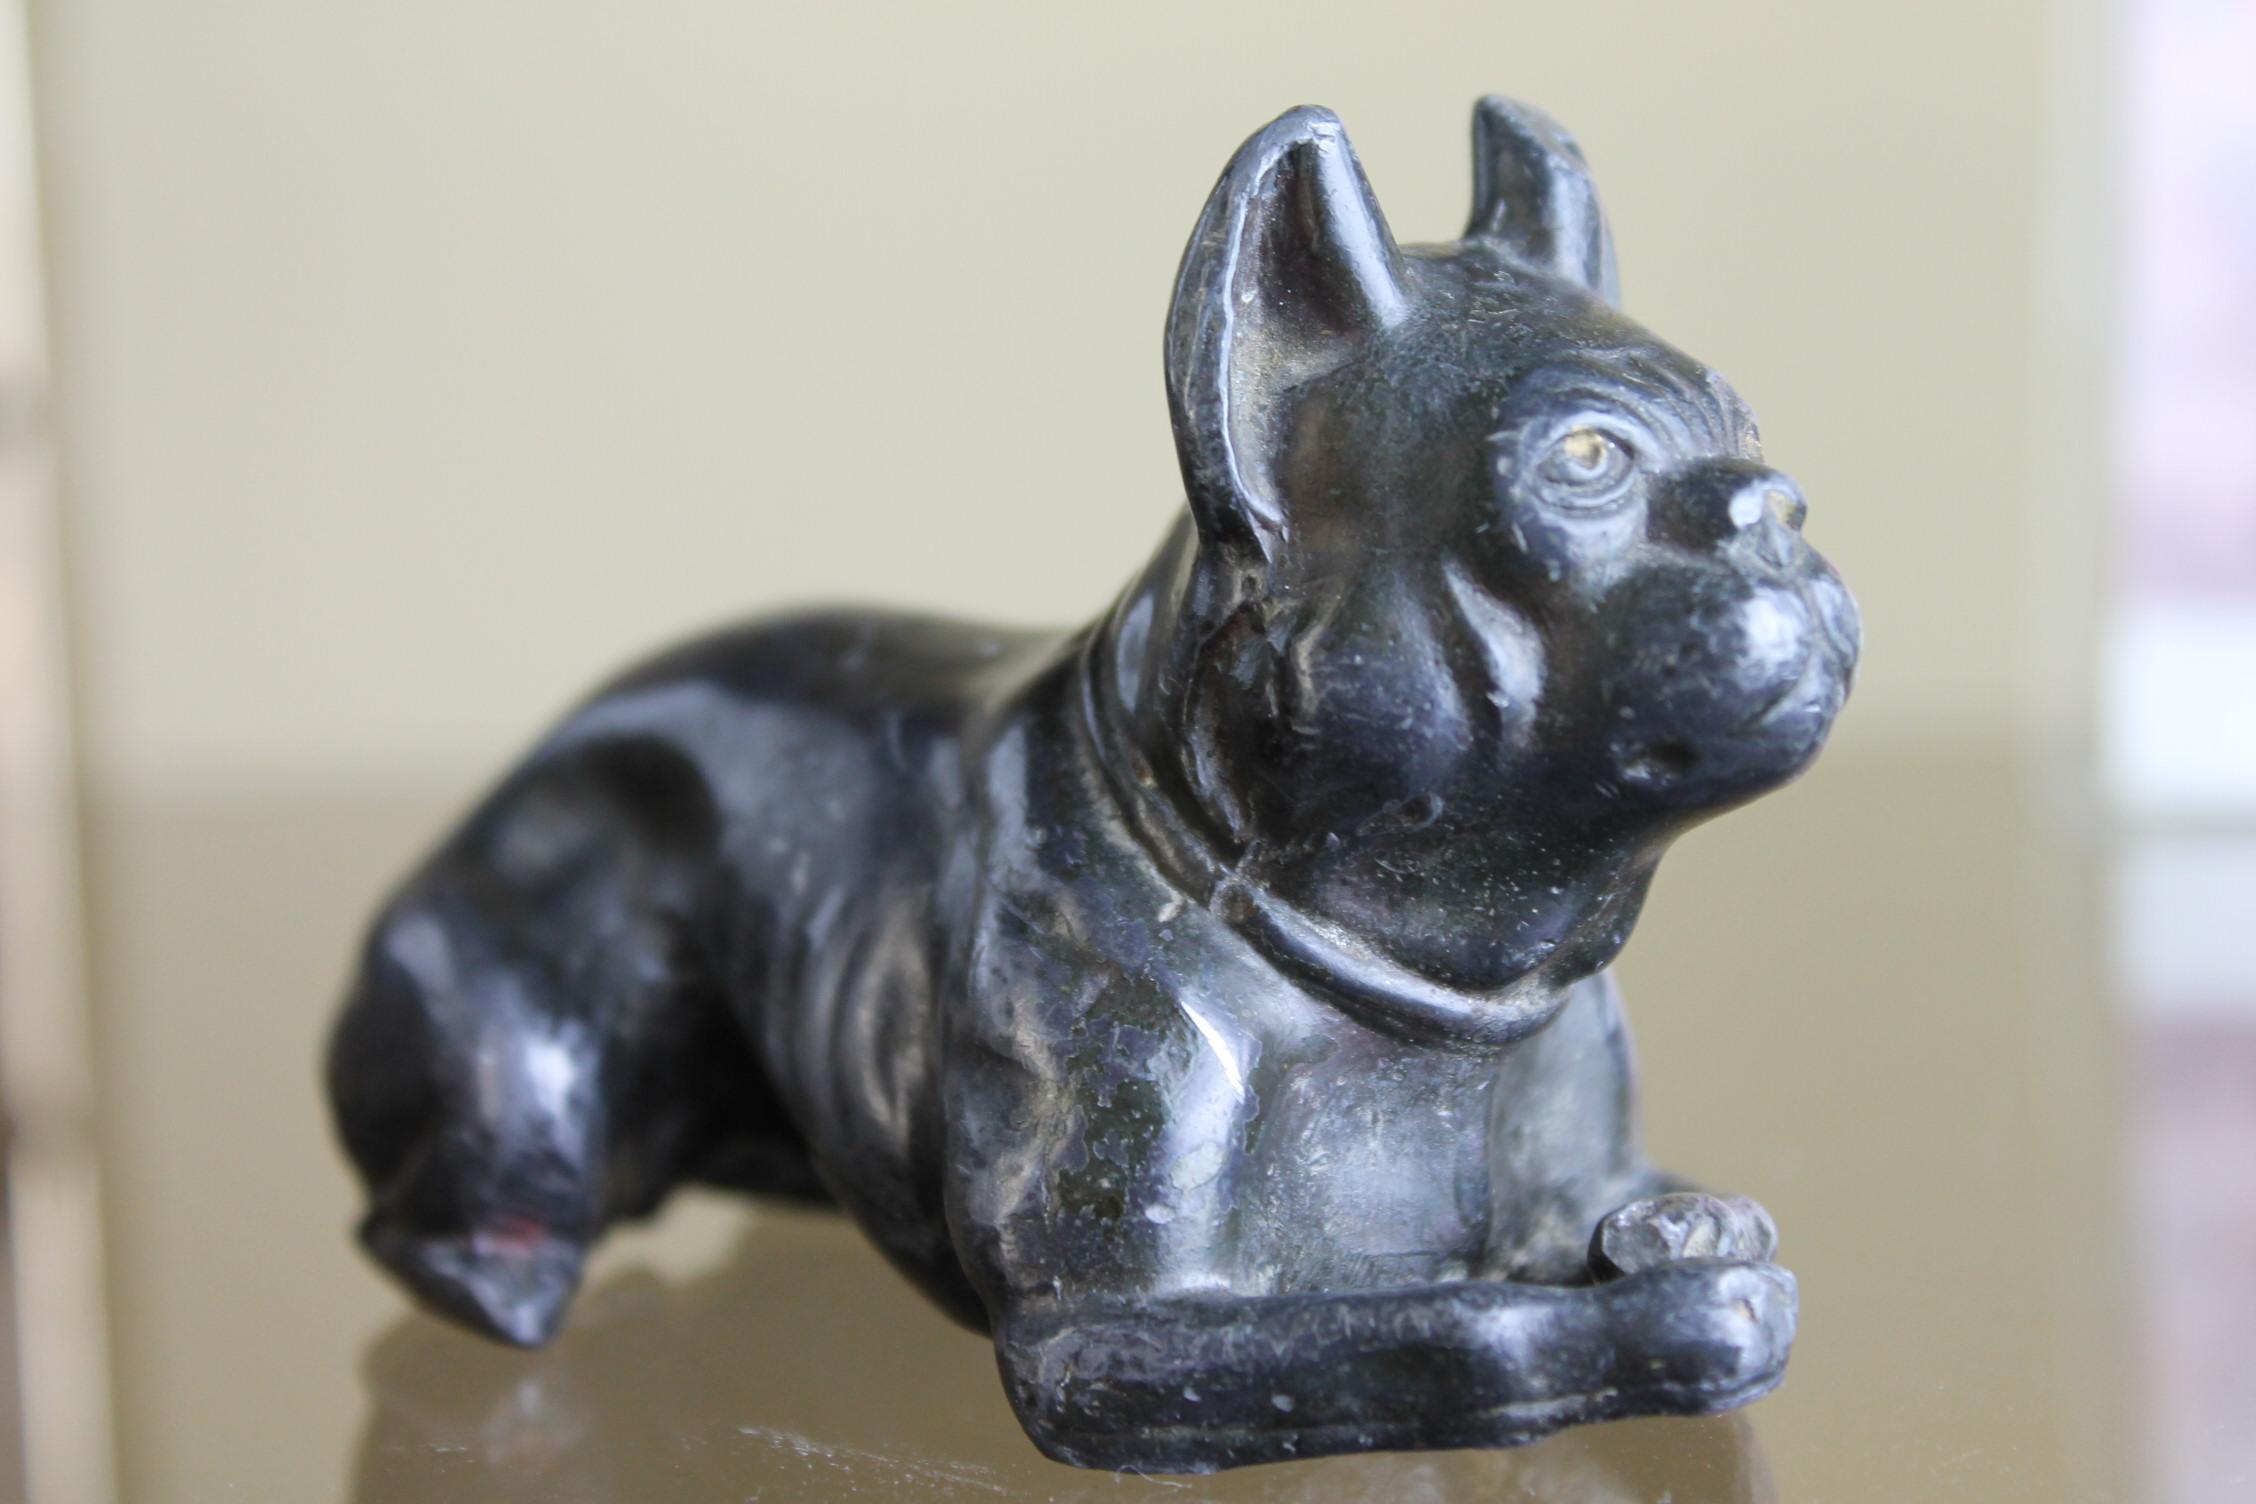 Antique metal French bulldog figurine in the style of Tiffanys Studio.
This heavy metal bulldog paperweight, statue
was probably mounted on a base or used as on ornament; see the chest of the dog.
Early 20th century, Art Nouveau, Art Deco
Dog